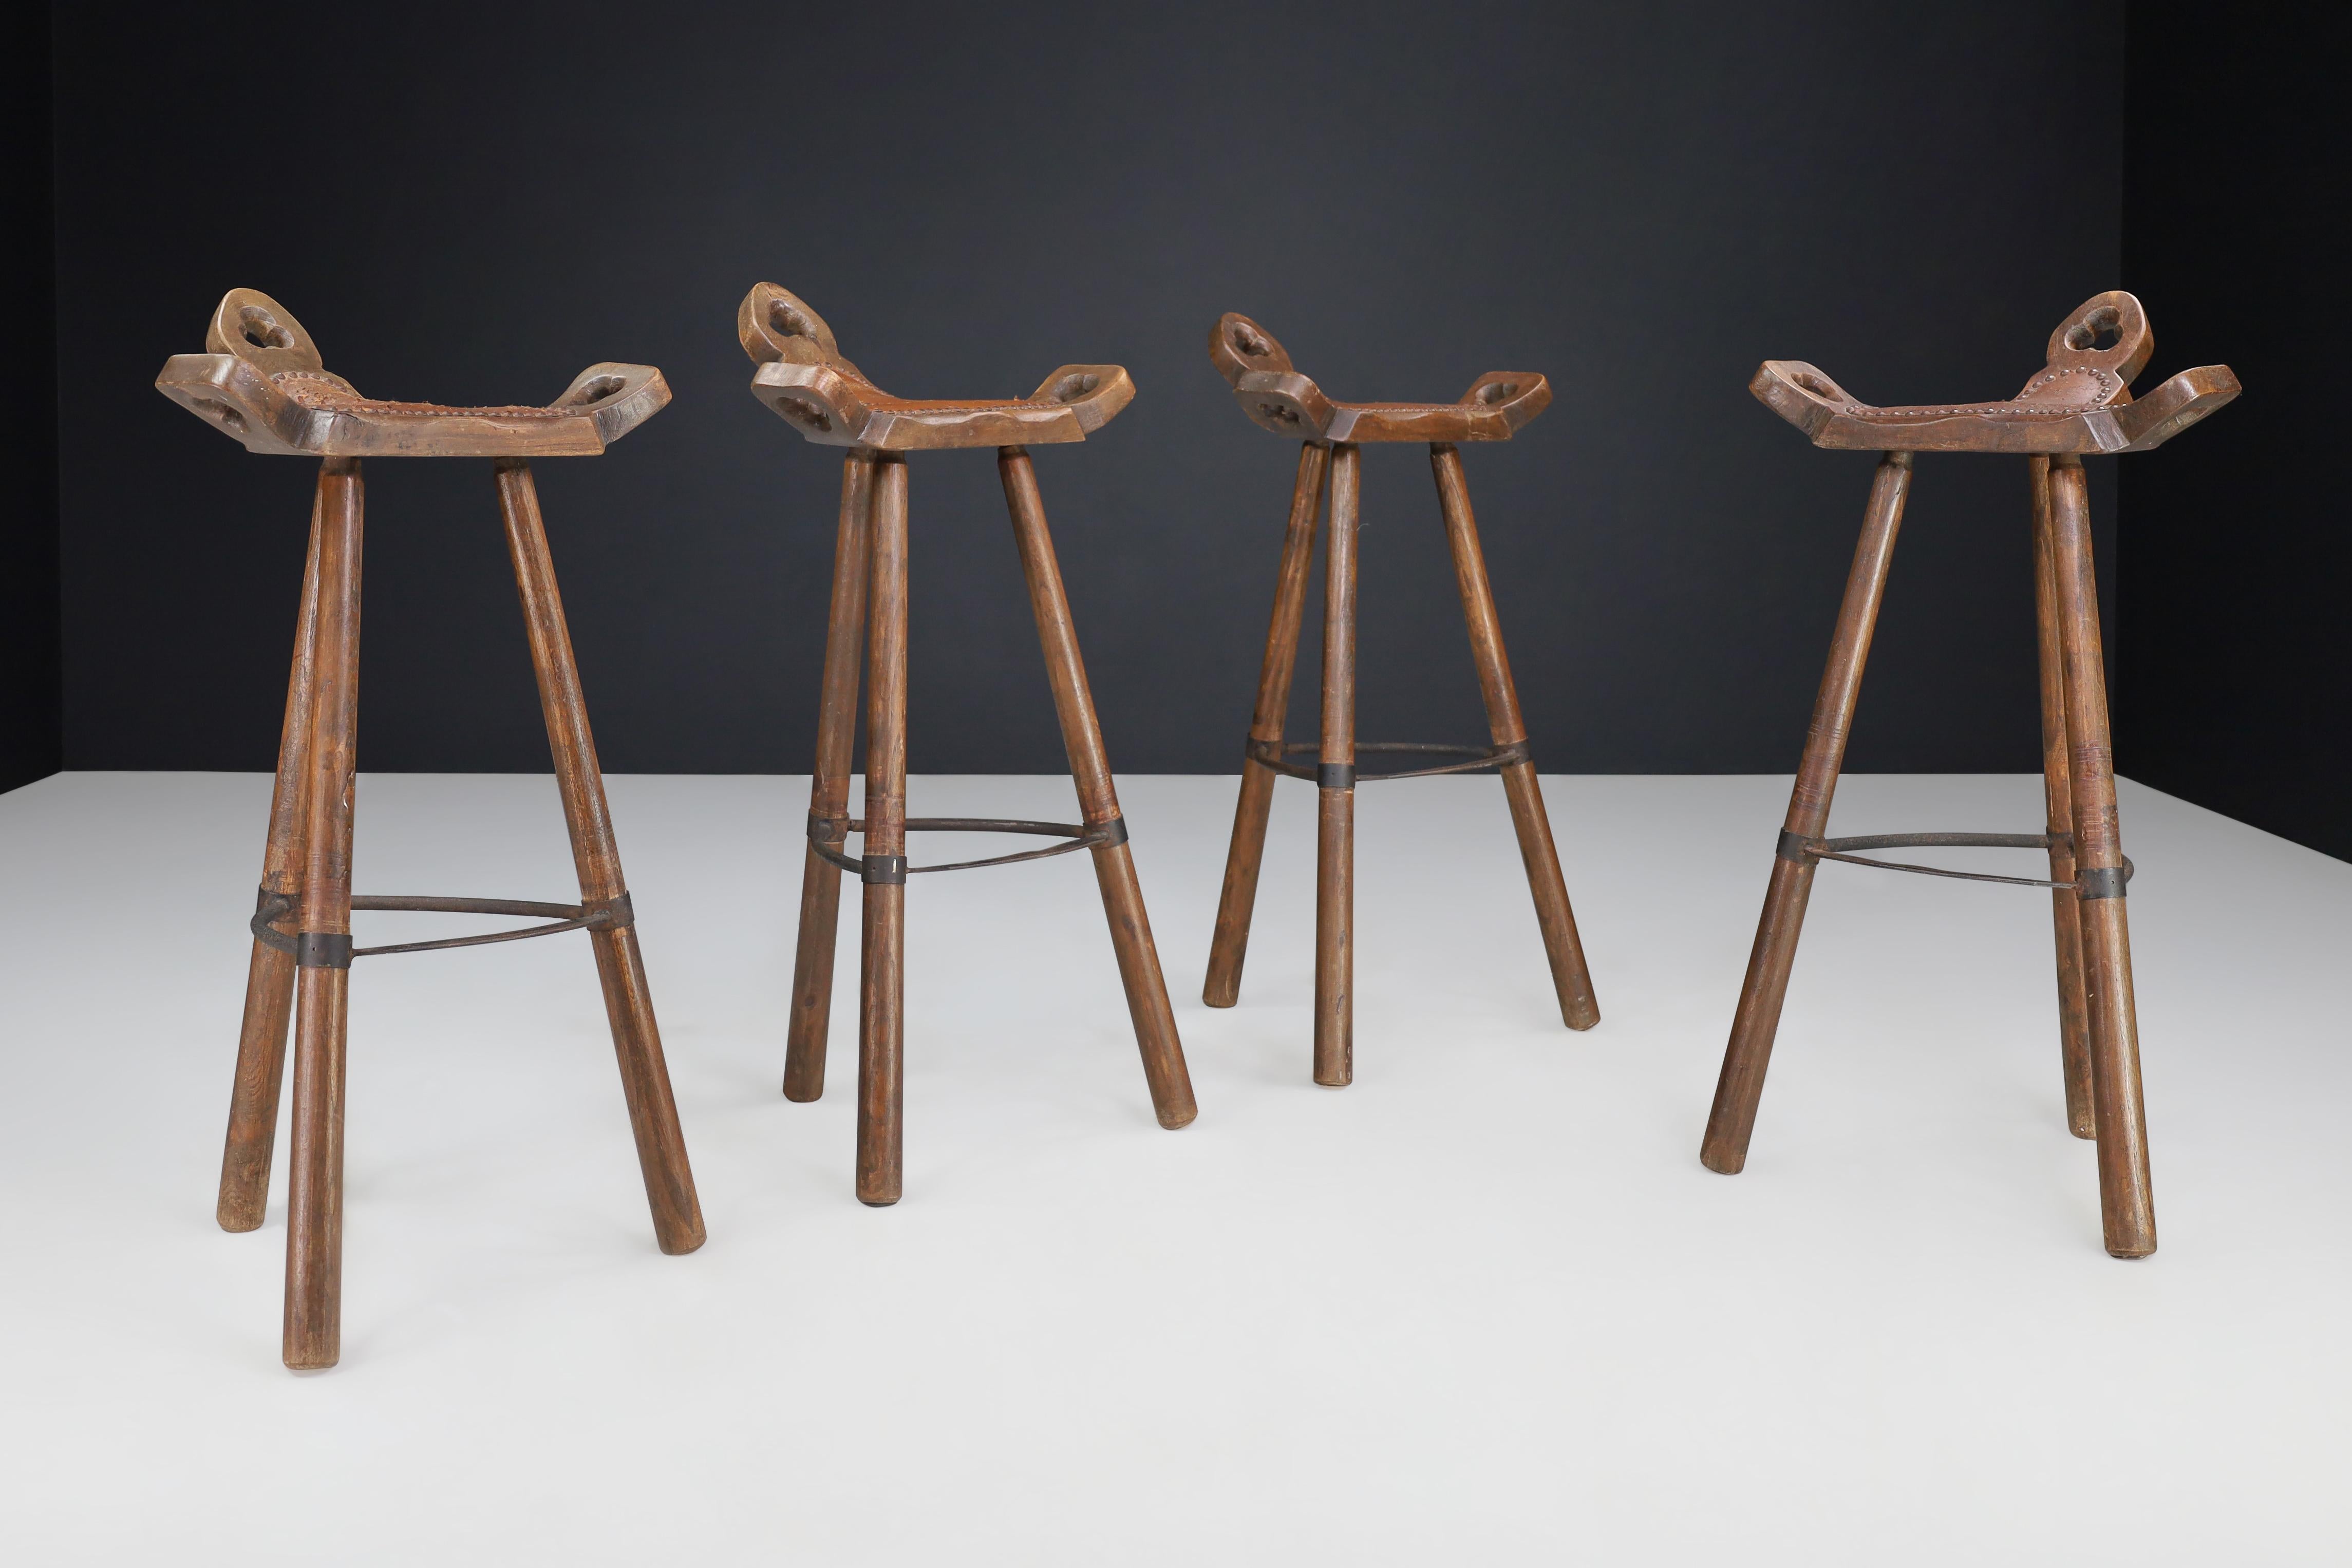 Set of Four Brutalist Stained Beech and Leather Bar Stools, Spain 1970s

Get your hands on these unique and stylish Spanish bar stools from the 1970s! Crafted from stained beech wood, leather, and metal, these stools boast a distinct T-shape